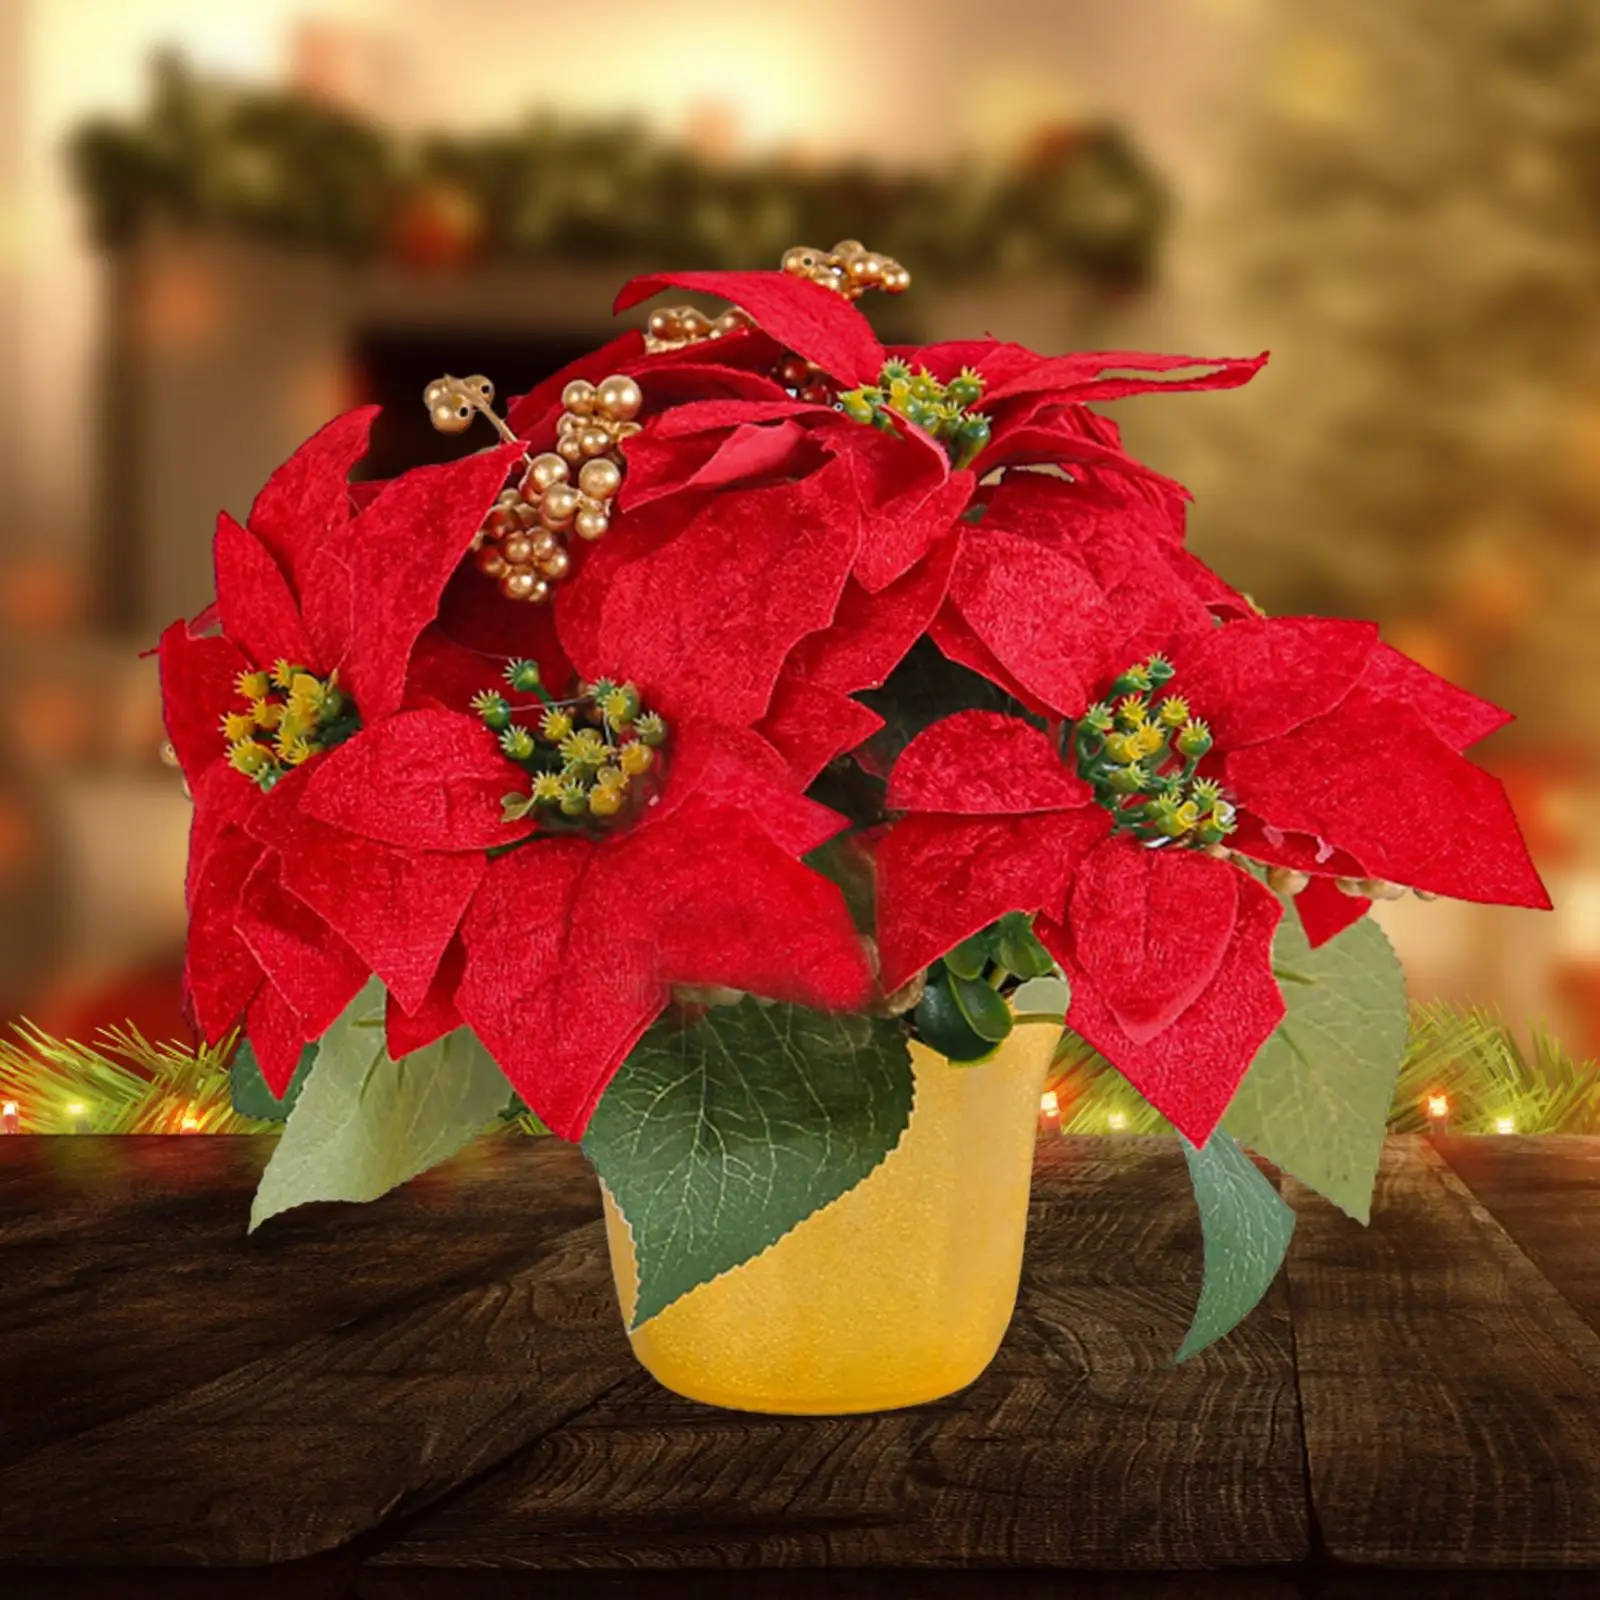 Potted Red Poinsettia Christmas Artificial Red Poinsettia Plant for Tabletop